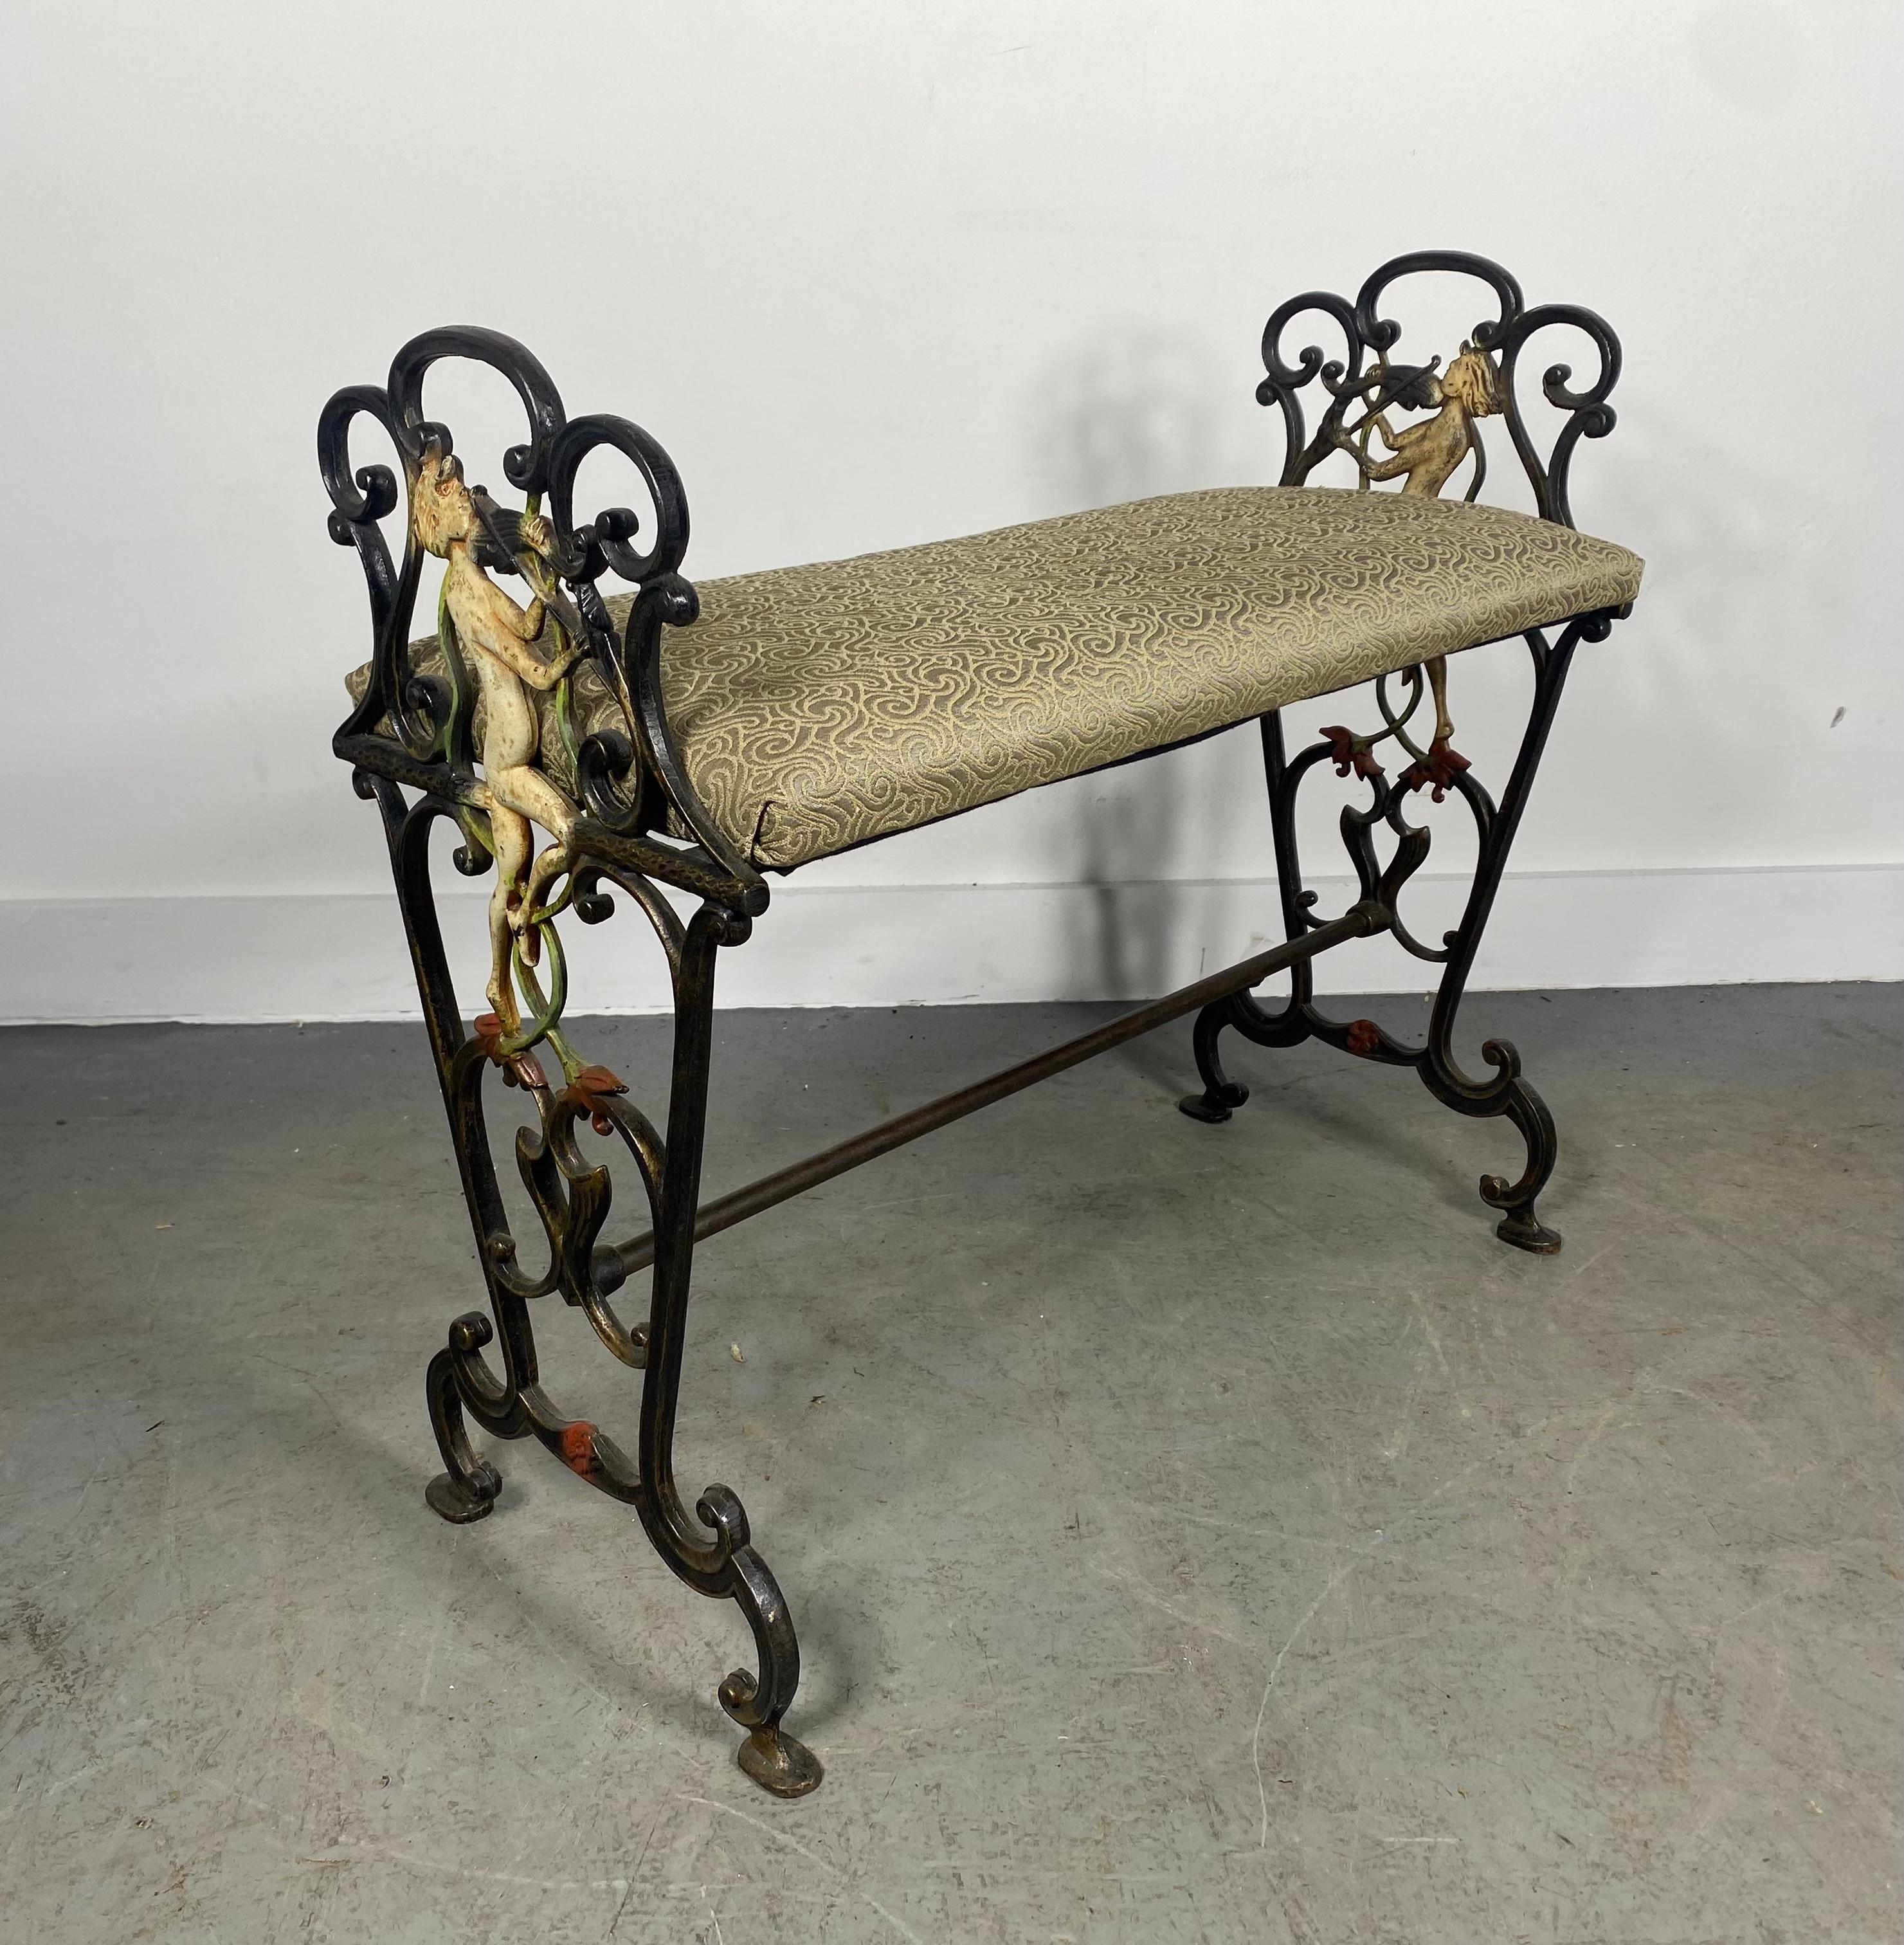 Charming and unusual Art Deco / Art Nouveau Cast Iron Bench, Wonderfully decorated and casted,,featuring almost mythological greek Figural Violinist Motif.. appears to be hand painted? Retains reupholstered fabric seat.